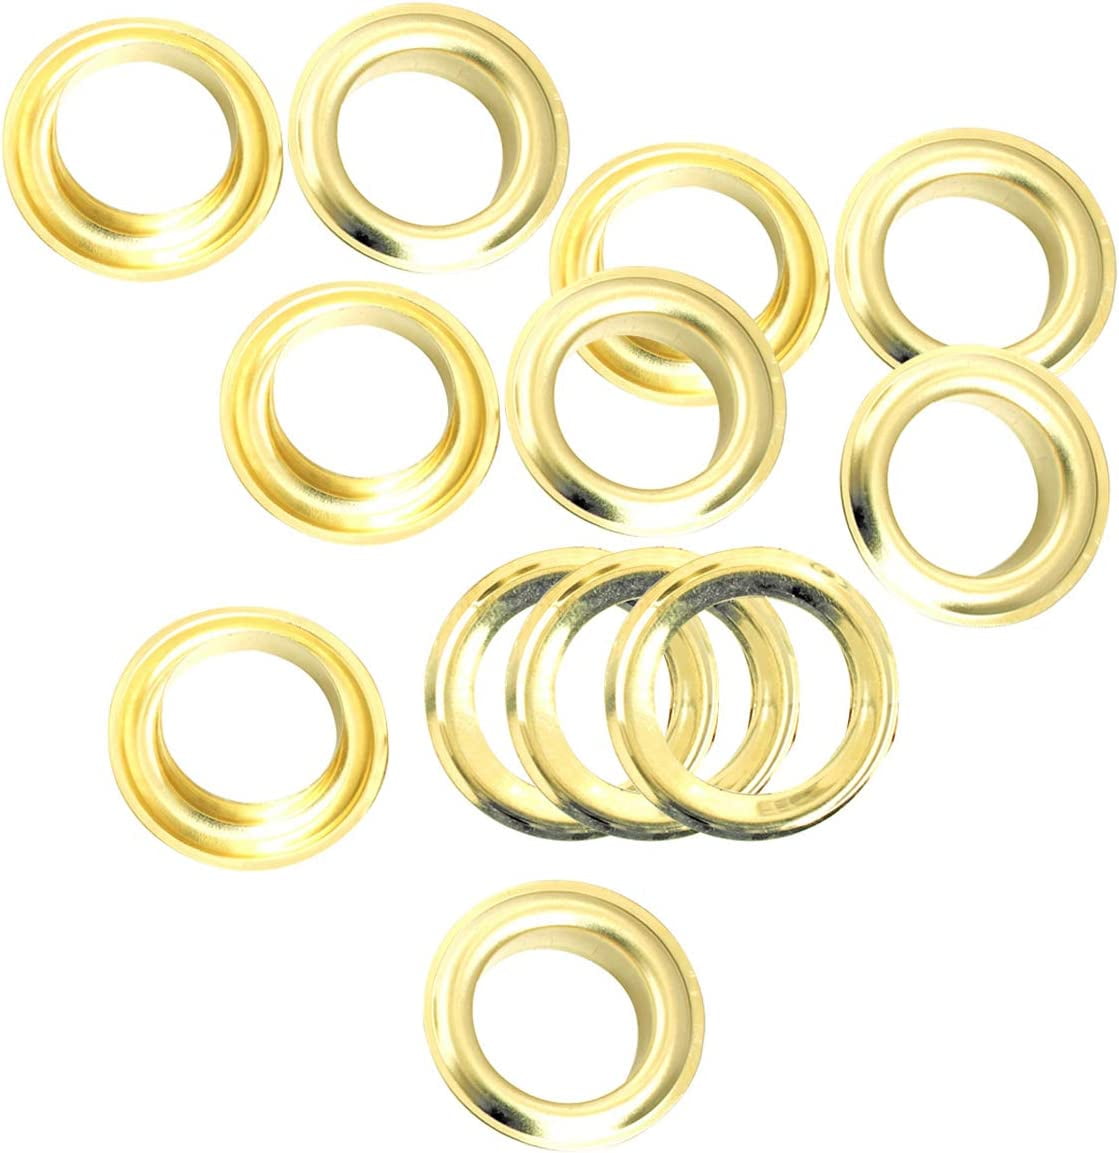 50-1000pcs 6.5mm Metal Eyelets Grommets With Washers For Leather Craft  Clothes